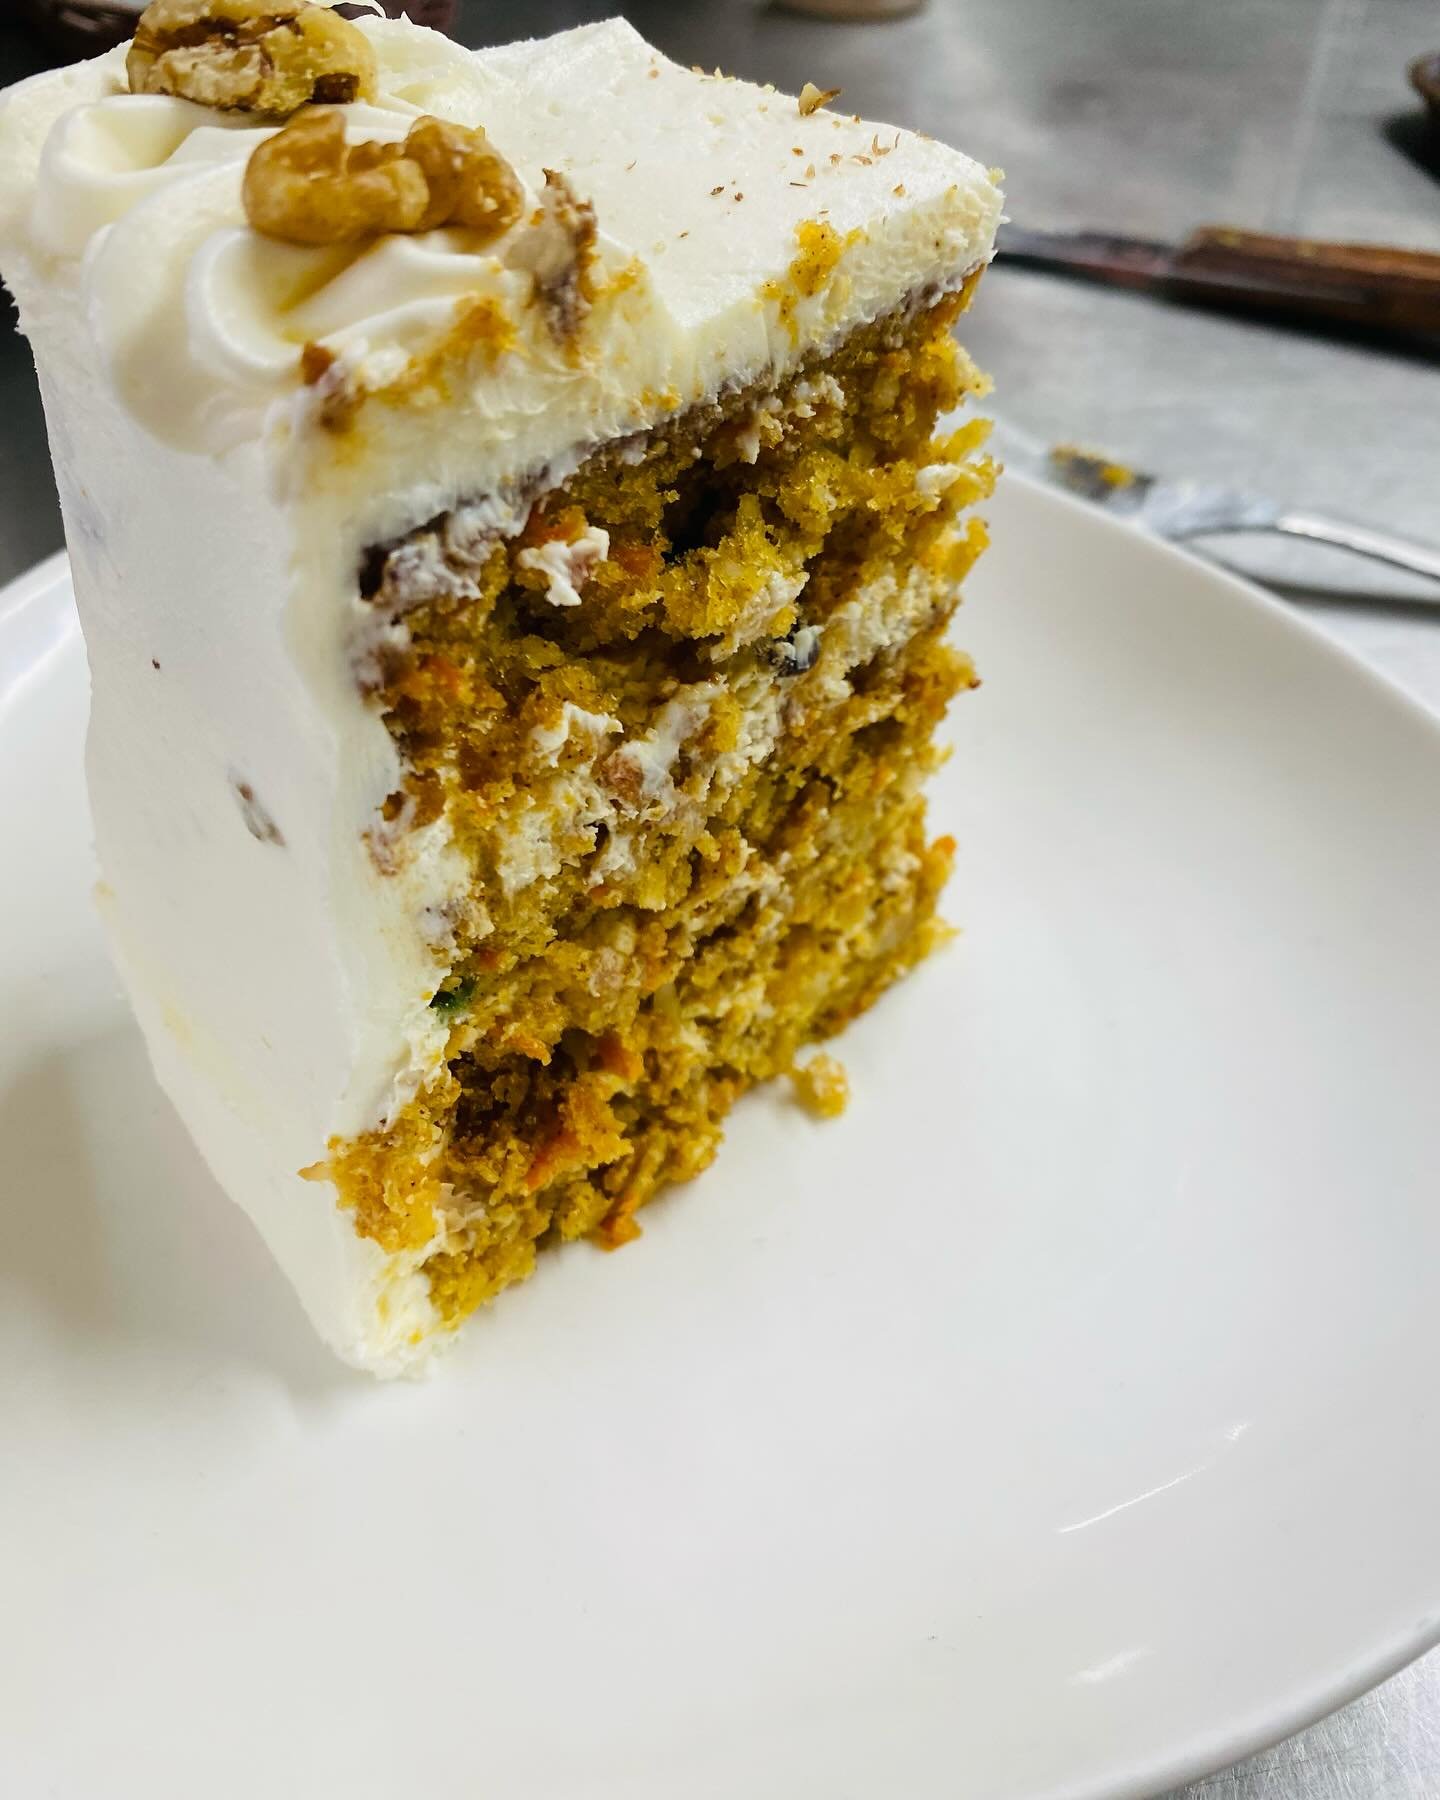 Jack, one of our longest &amp; most supportive guests, has not been feeling well and told Cheryl that carrot cake would make him feel better. That&rsquo;s Jacks piece that&rsquo;s cut.  She only made one.  While supplies last.  Call quick. #tiffanyst